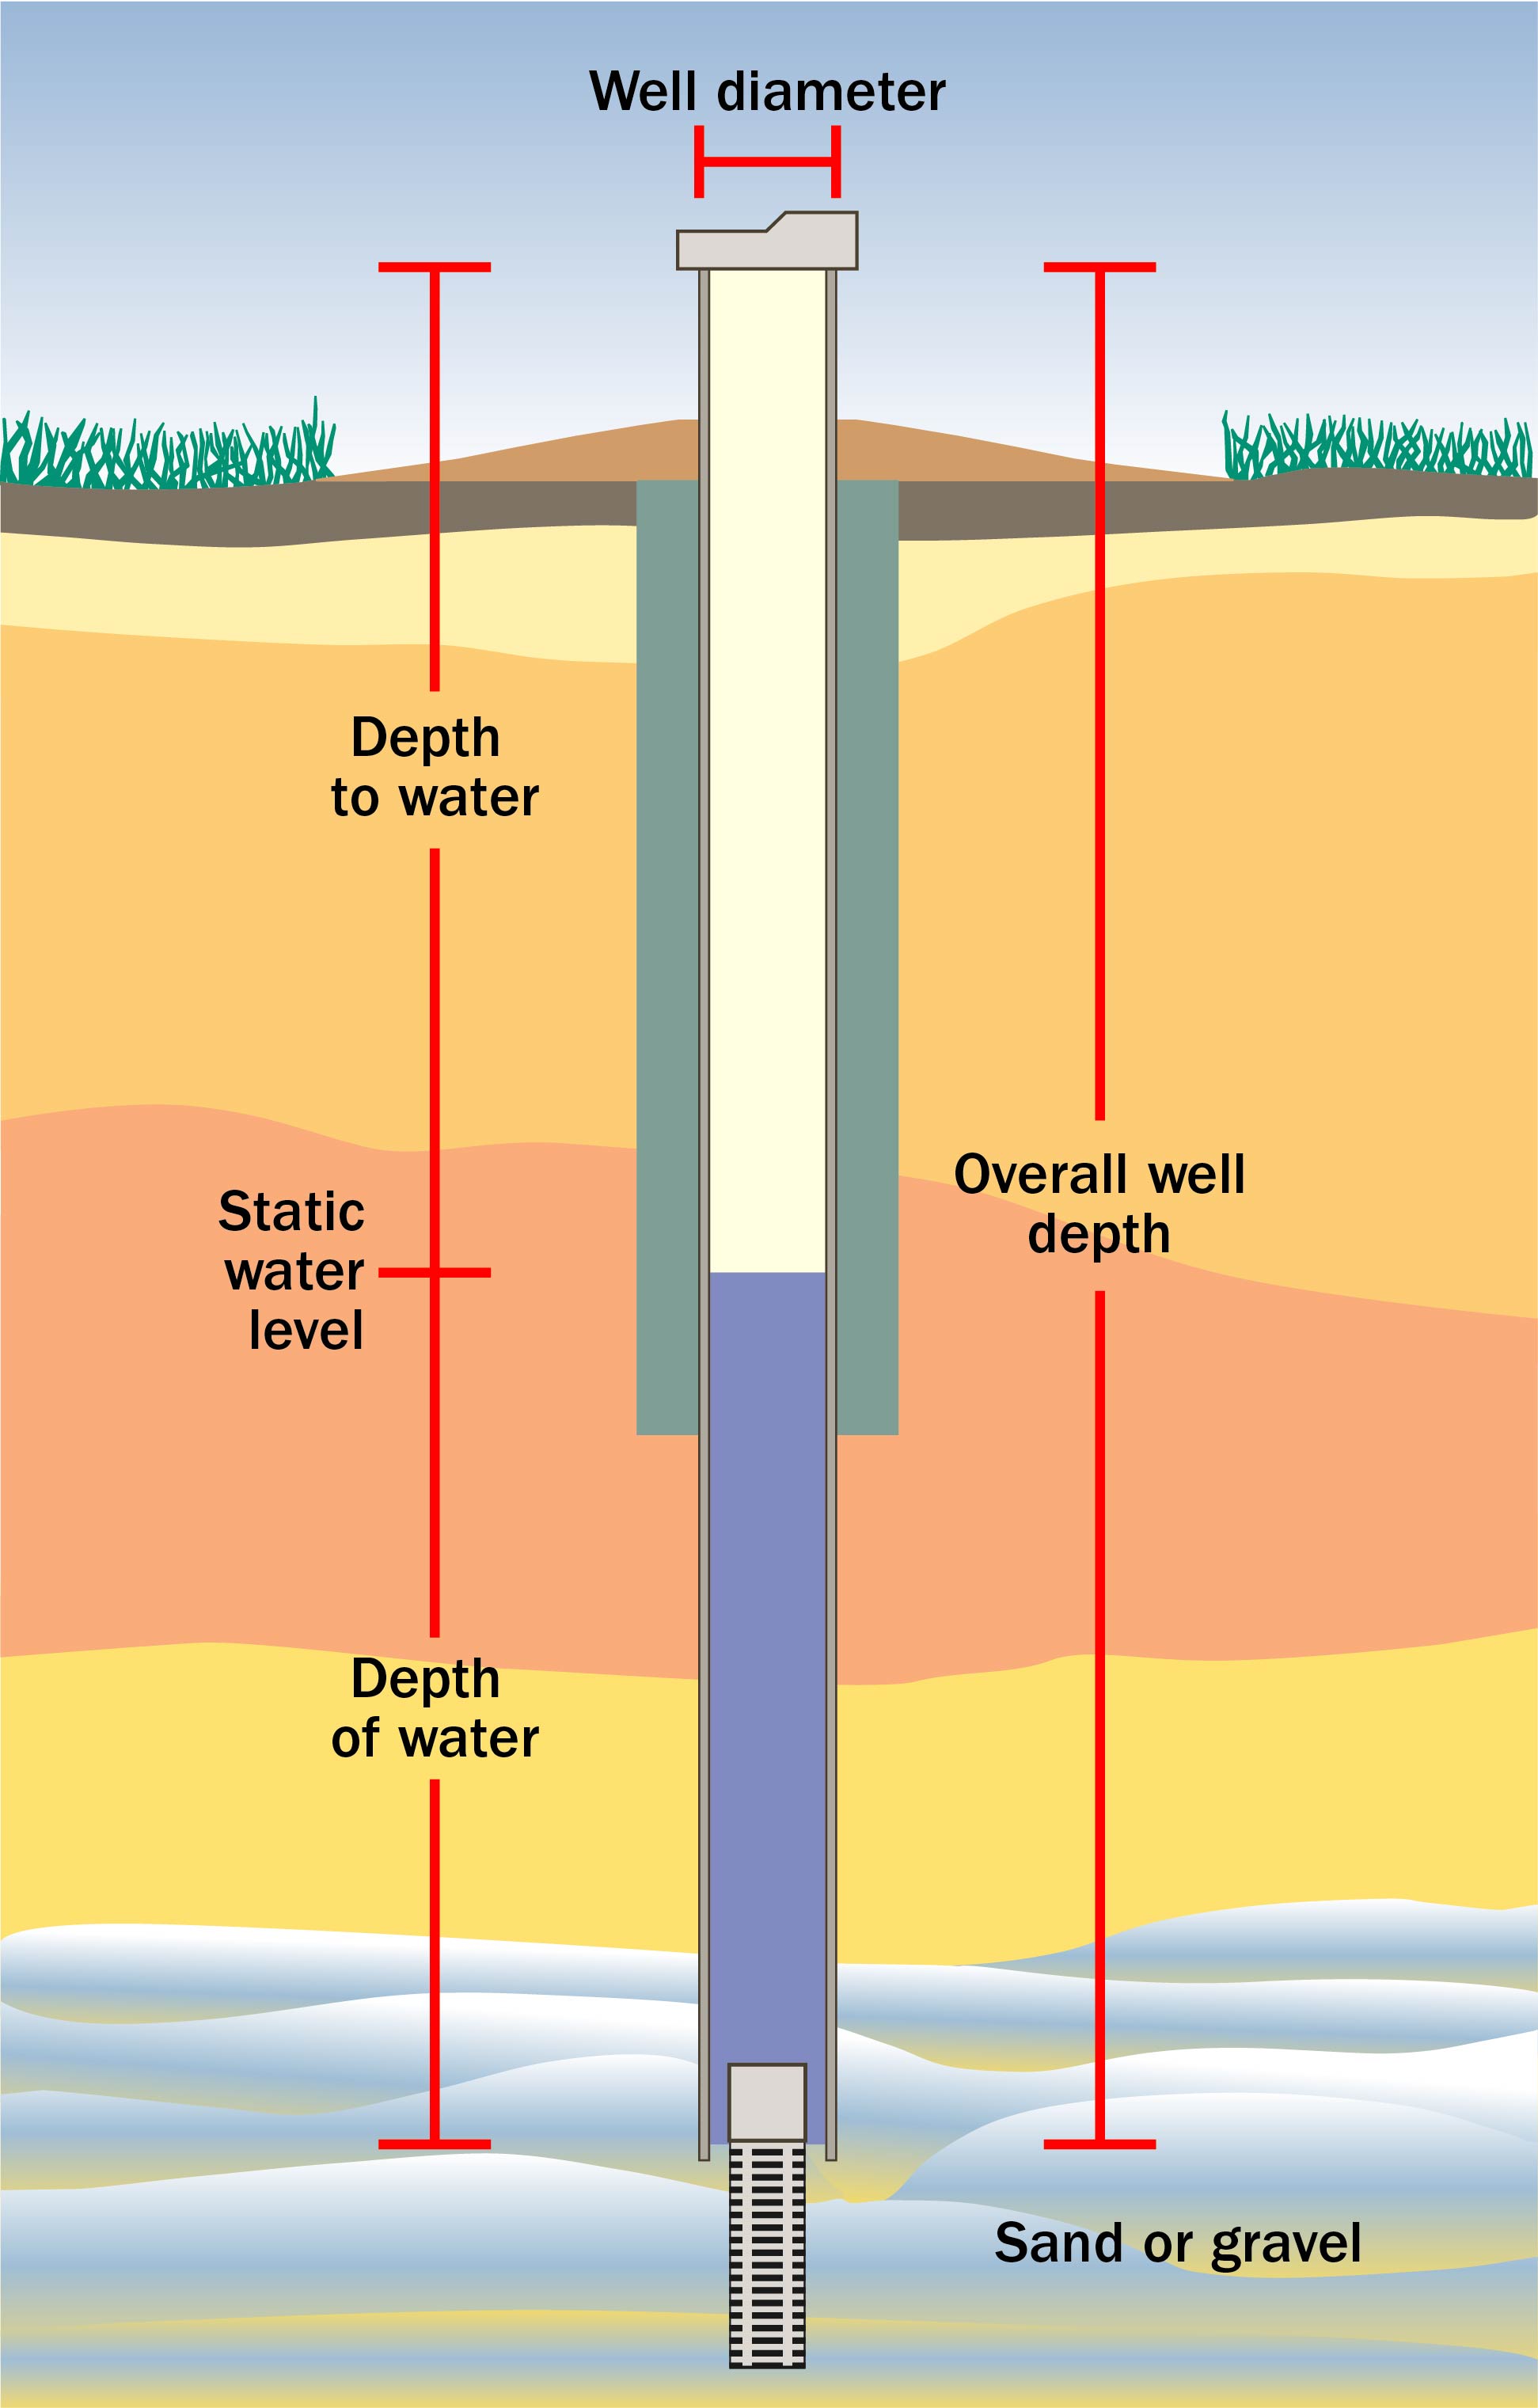 Cross-section of a well showing the various depths to water, gravel or sand.